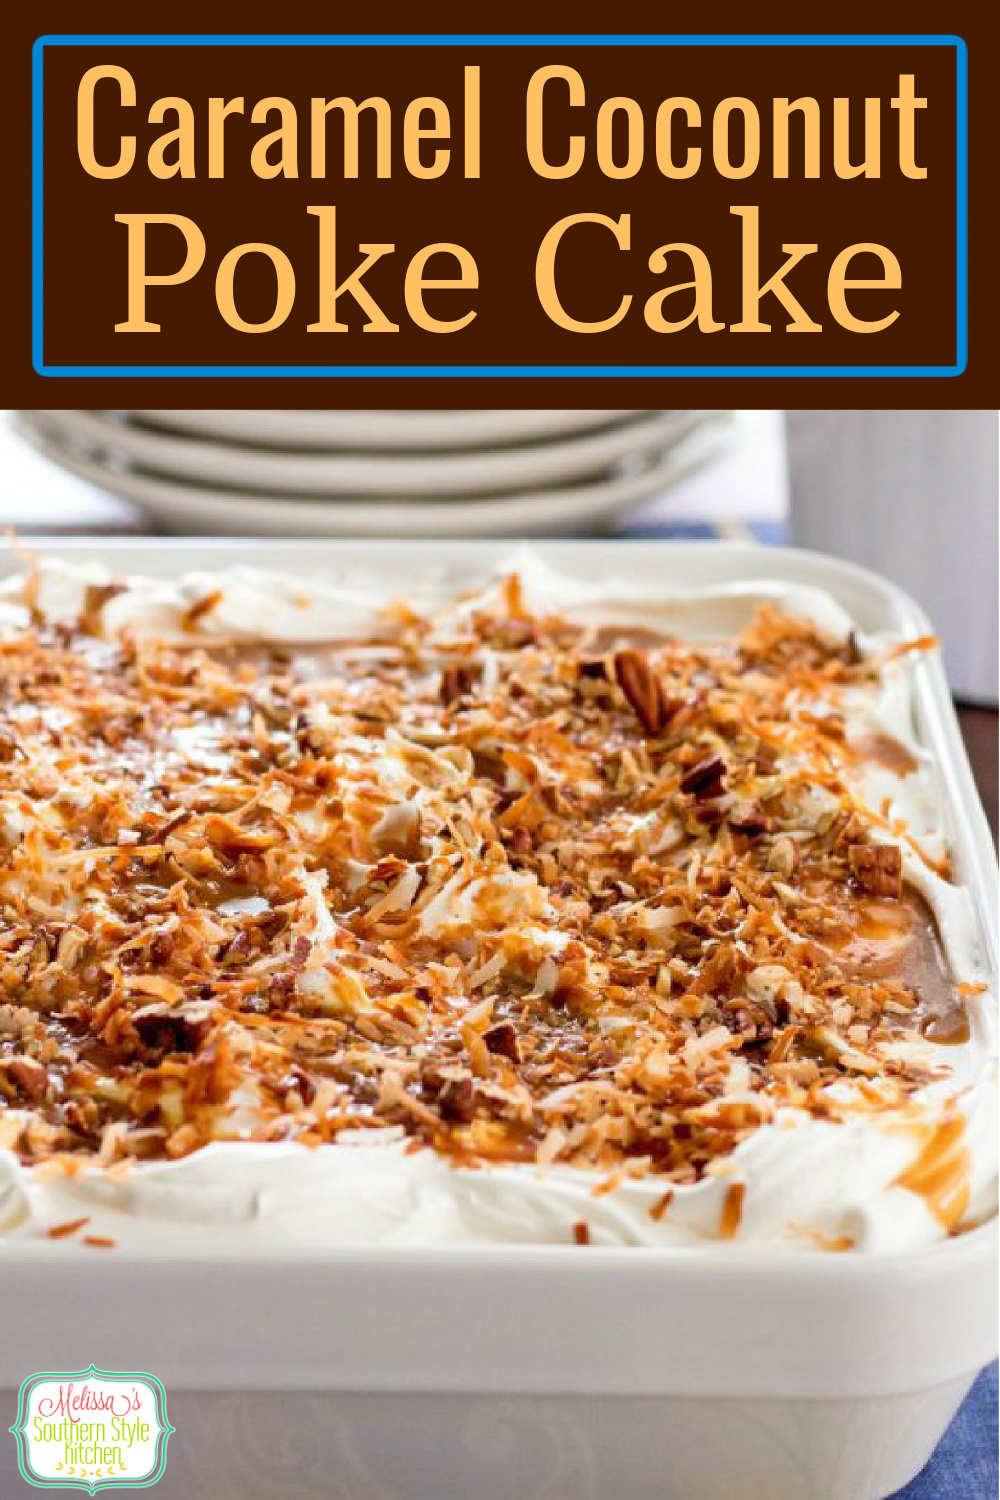 This Salted Caramel Coconut Poke Cake features a buttery vanilla-coconut cake that's soaked with caramel, then frosted with whipped cream #caramelcake #caramelcoconutpokecake #pokecakerecipes #southerncaramelcake #cakes #caramel #coconut #cakerecipes via @melissasssk